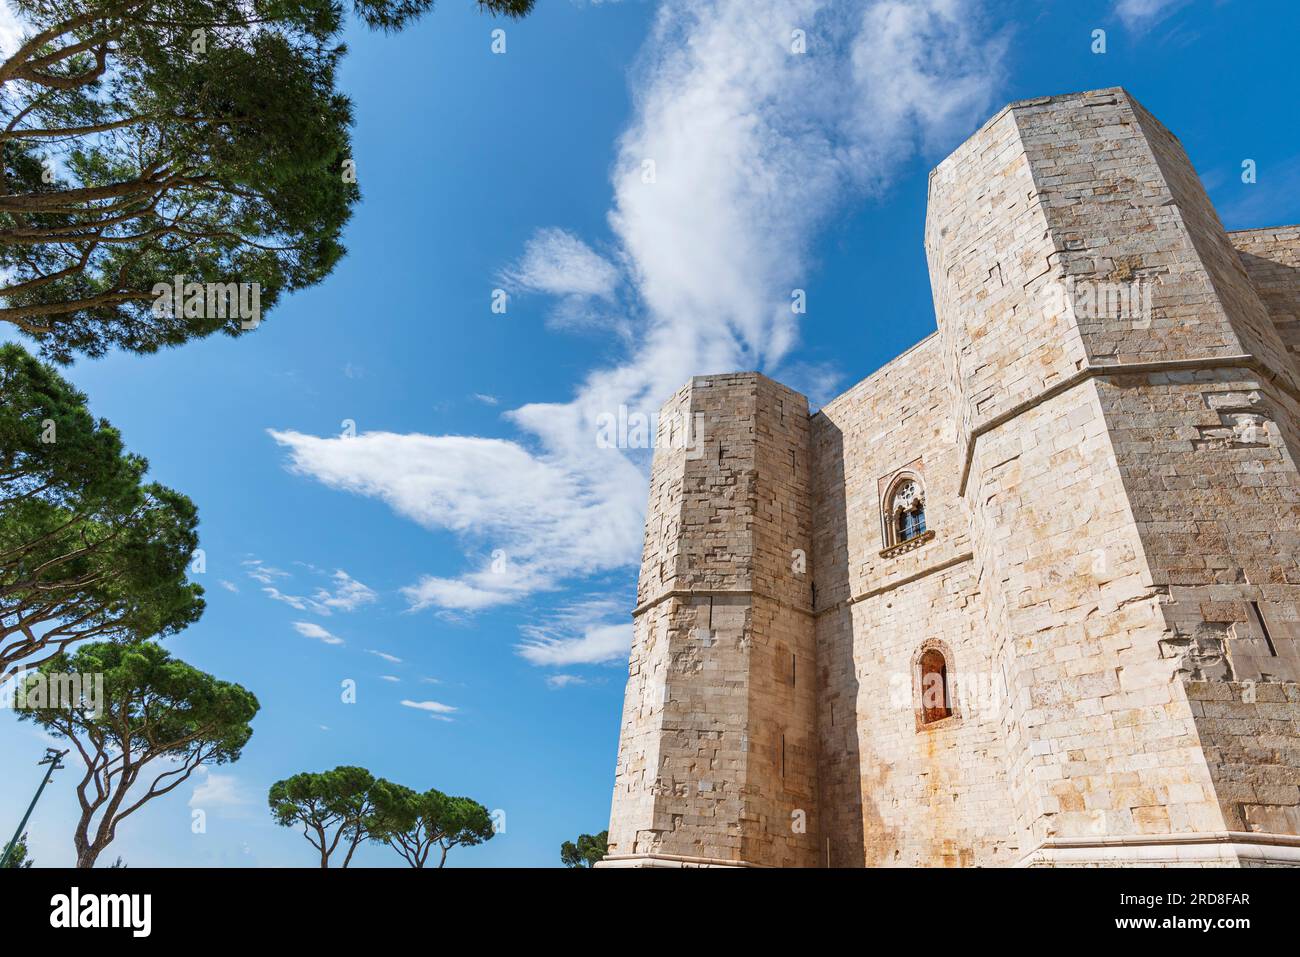 Detail of the side facade of the octagonal castle of Castel del Monte, UNESCO World Heritage Site, Apulia, Italy, Europe Stock Photo